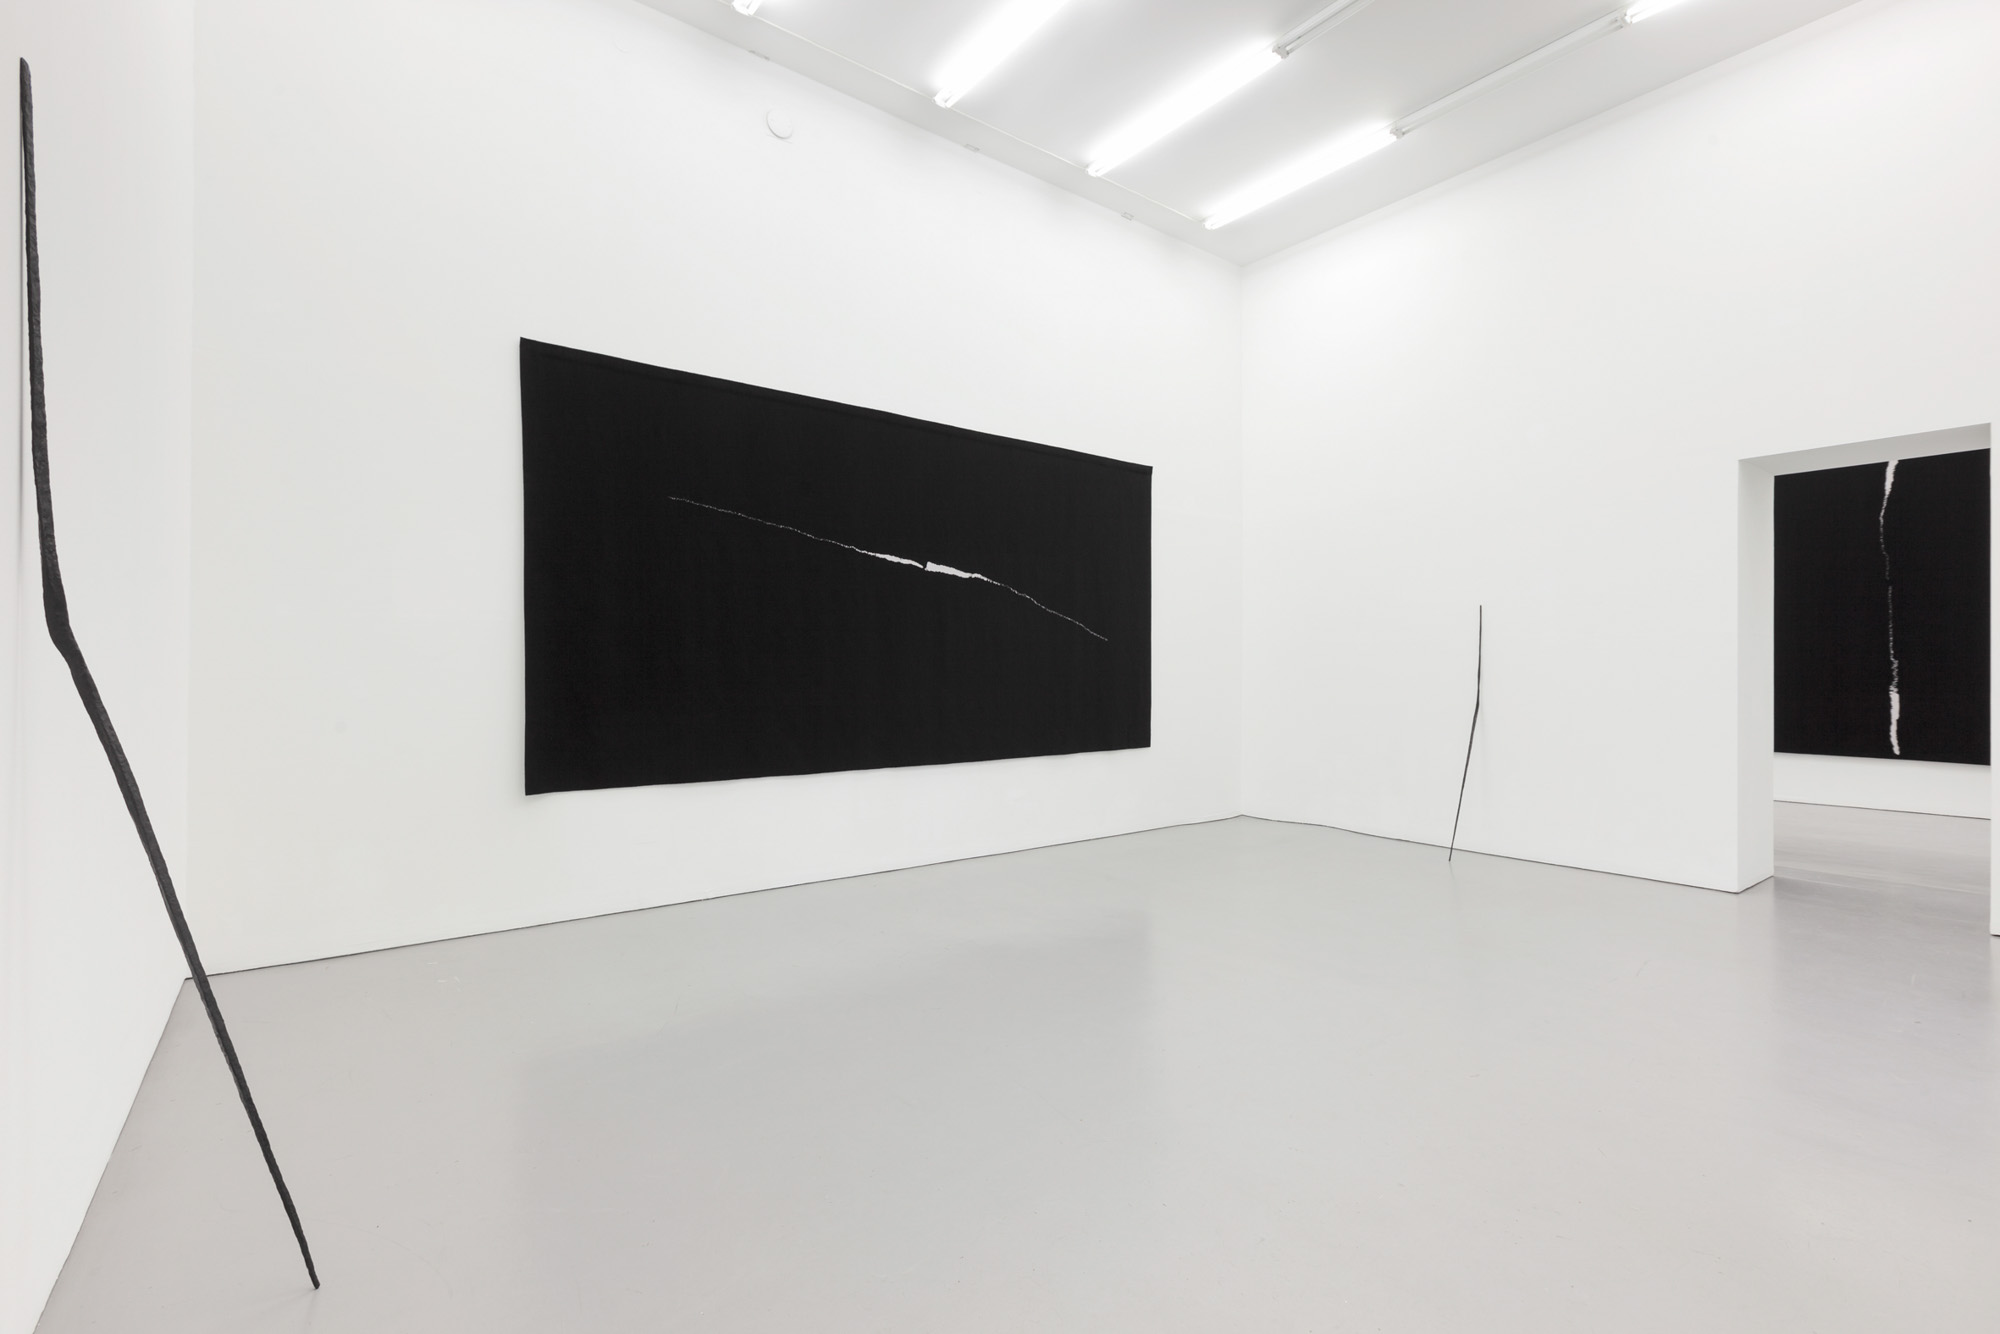  Installation view, JAN GROTH, Selected works 1990-2012, Galleri Riis, Stockholm 2012 